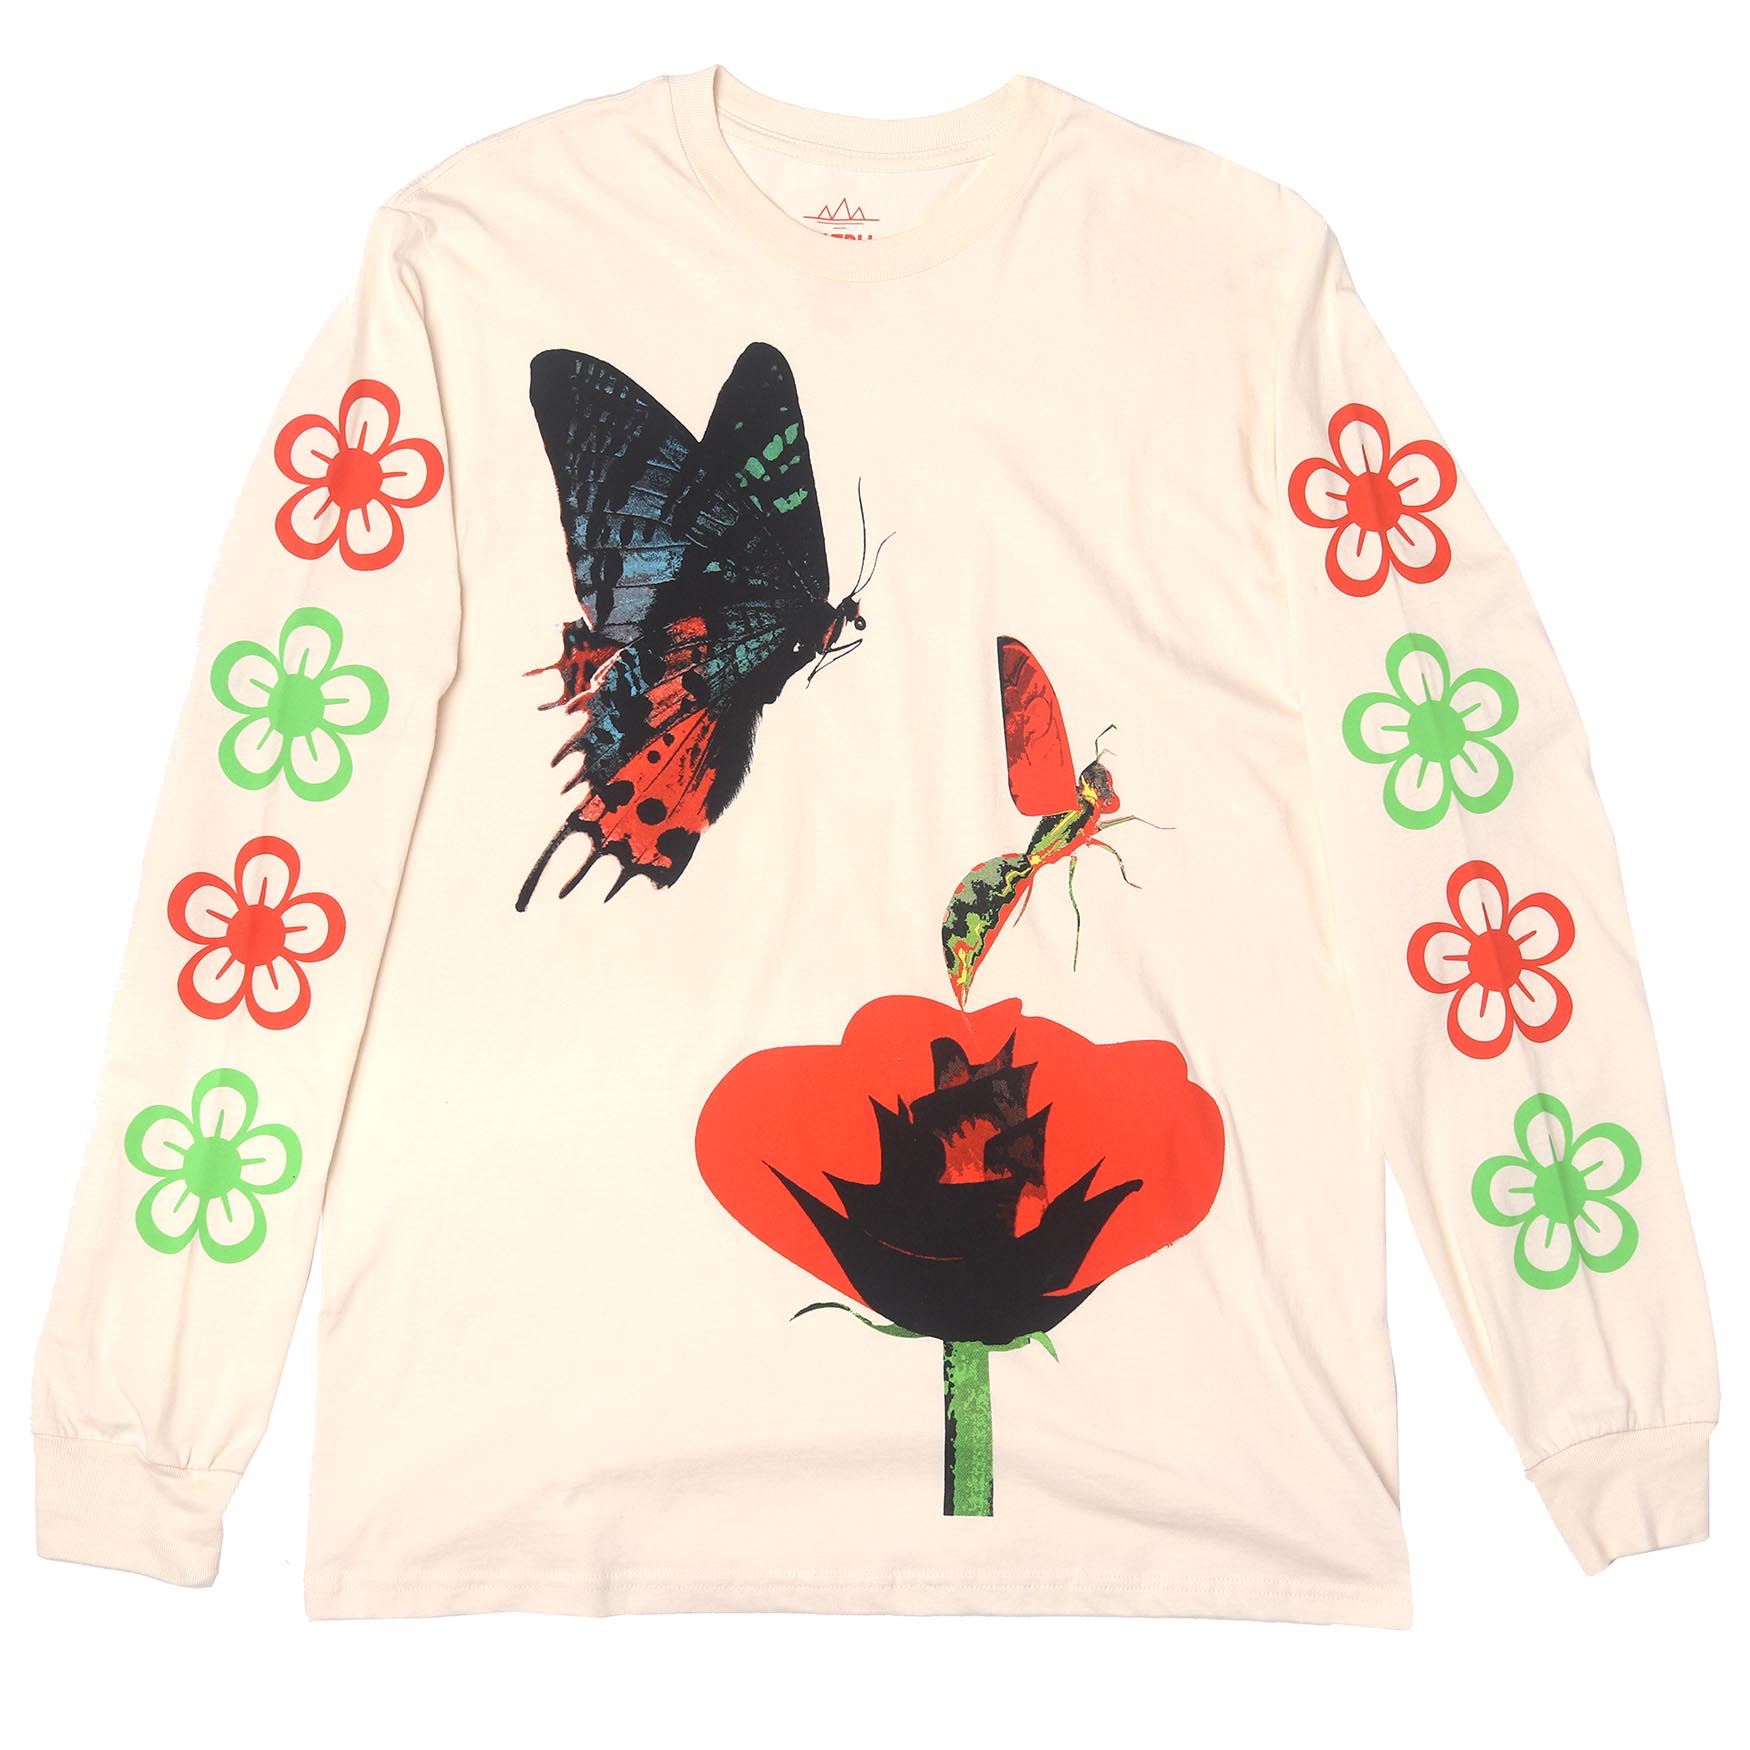 Butterfly Flower Nature L/S tee graphic on front & sleeves